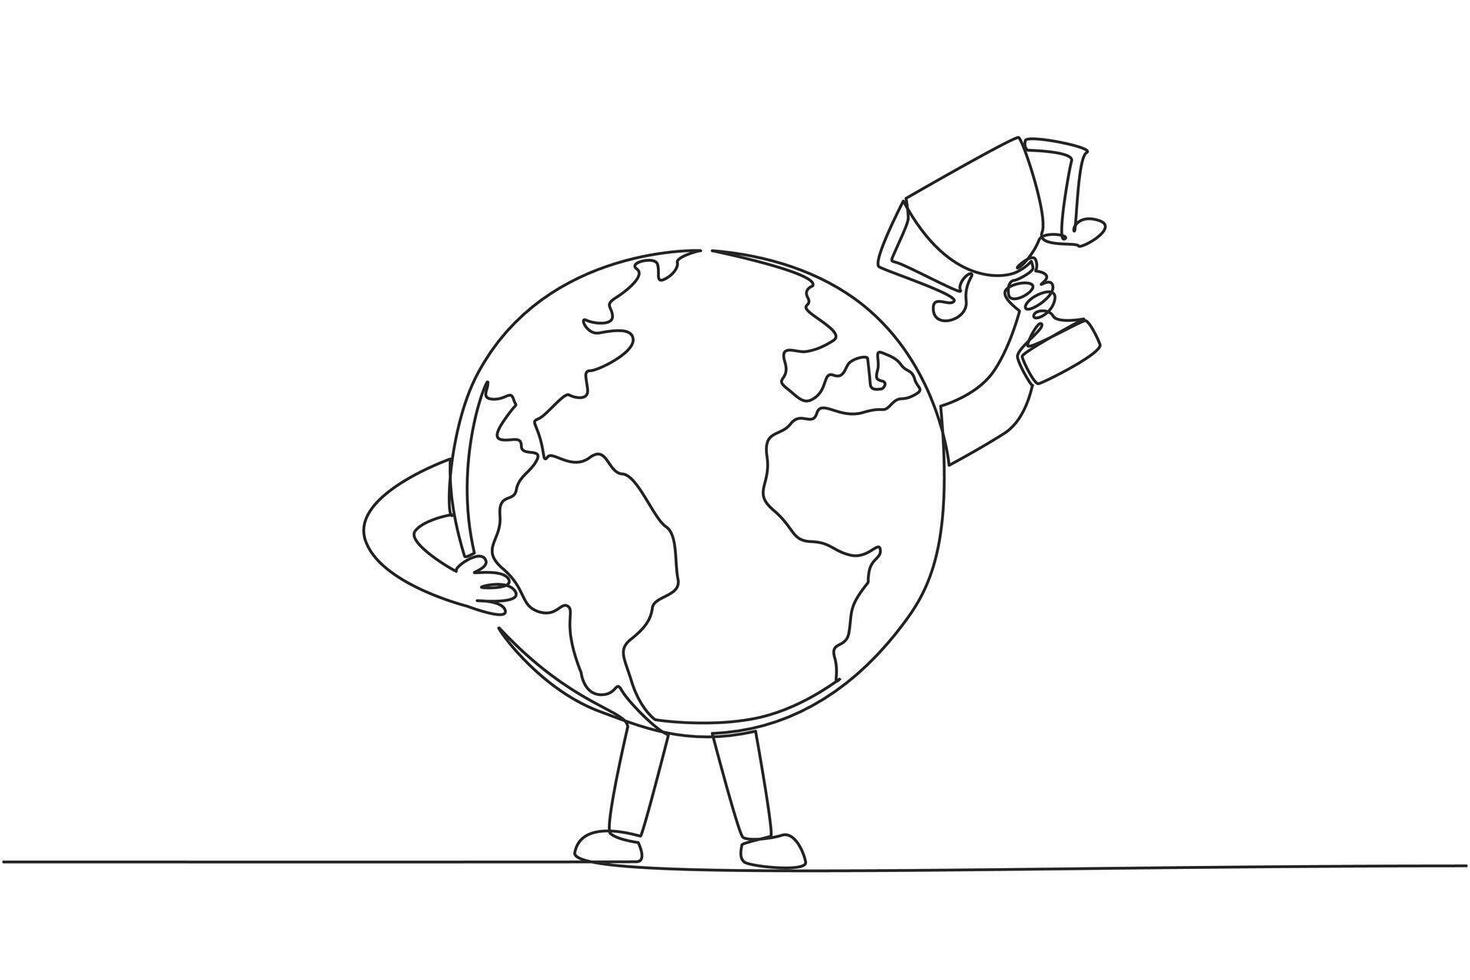 Single one line drawing globe raised the trophy with one of his hands. The best place for all living things. Keeping the earth green. Saving the earth. Continuous line design graphic illustration vector